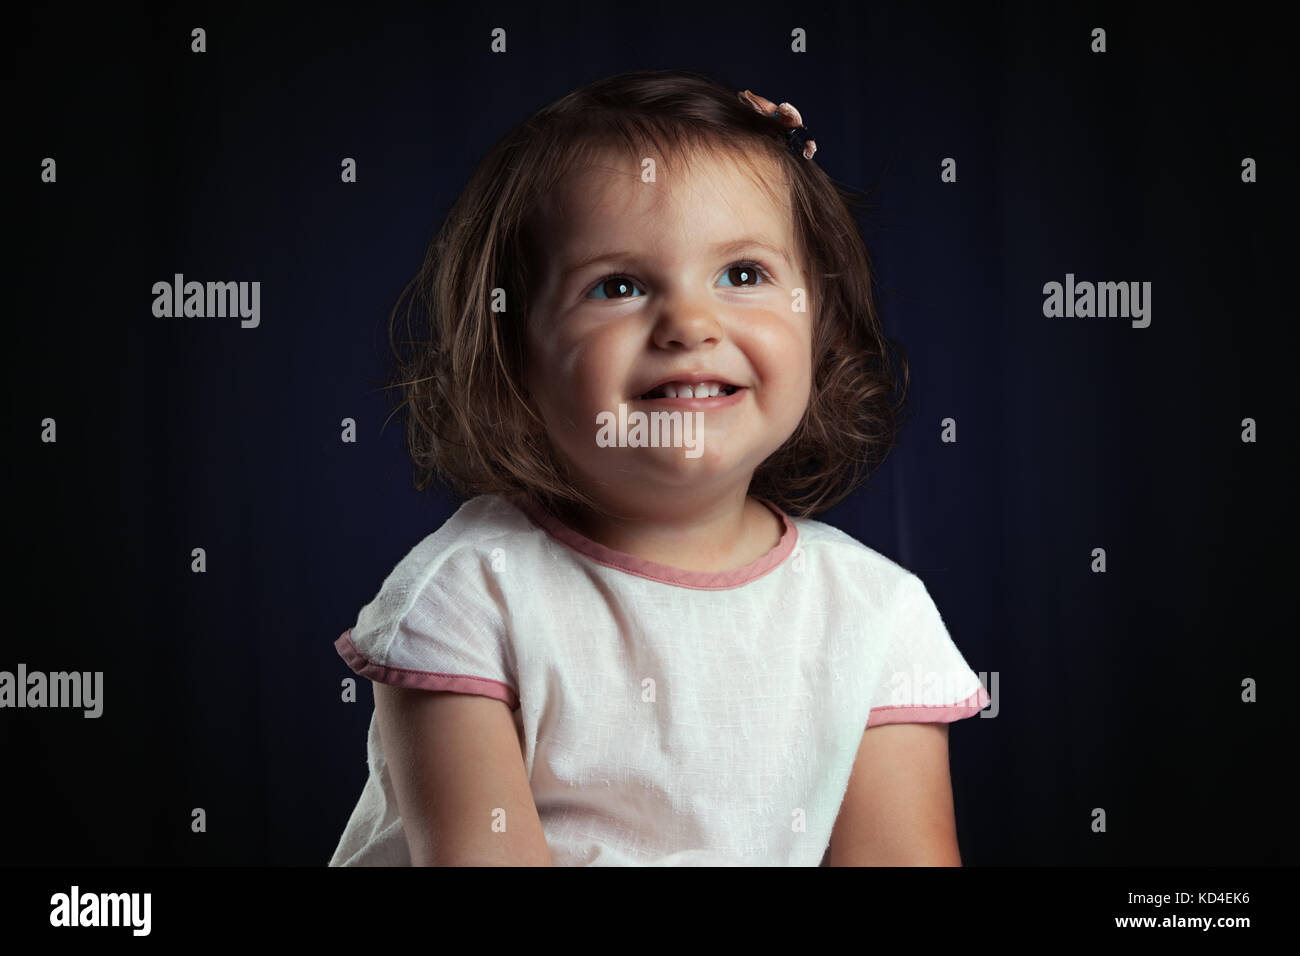 Portrait of a cute little smiling baby girl on black background Stock Photo